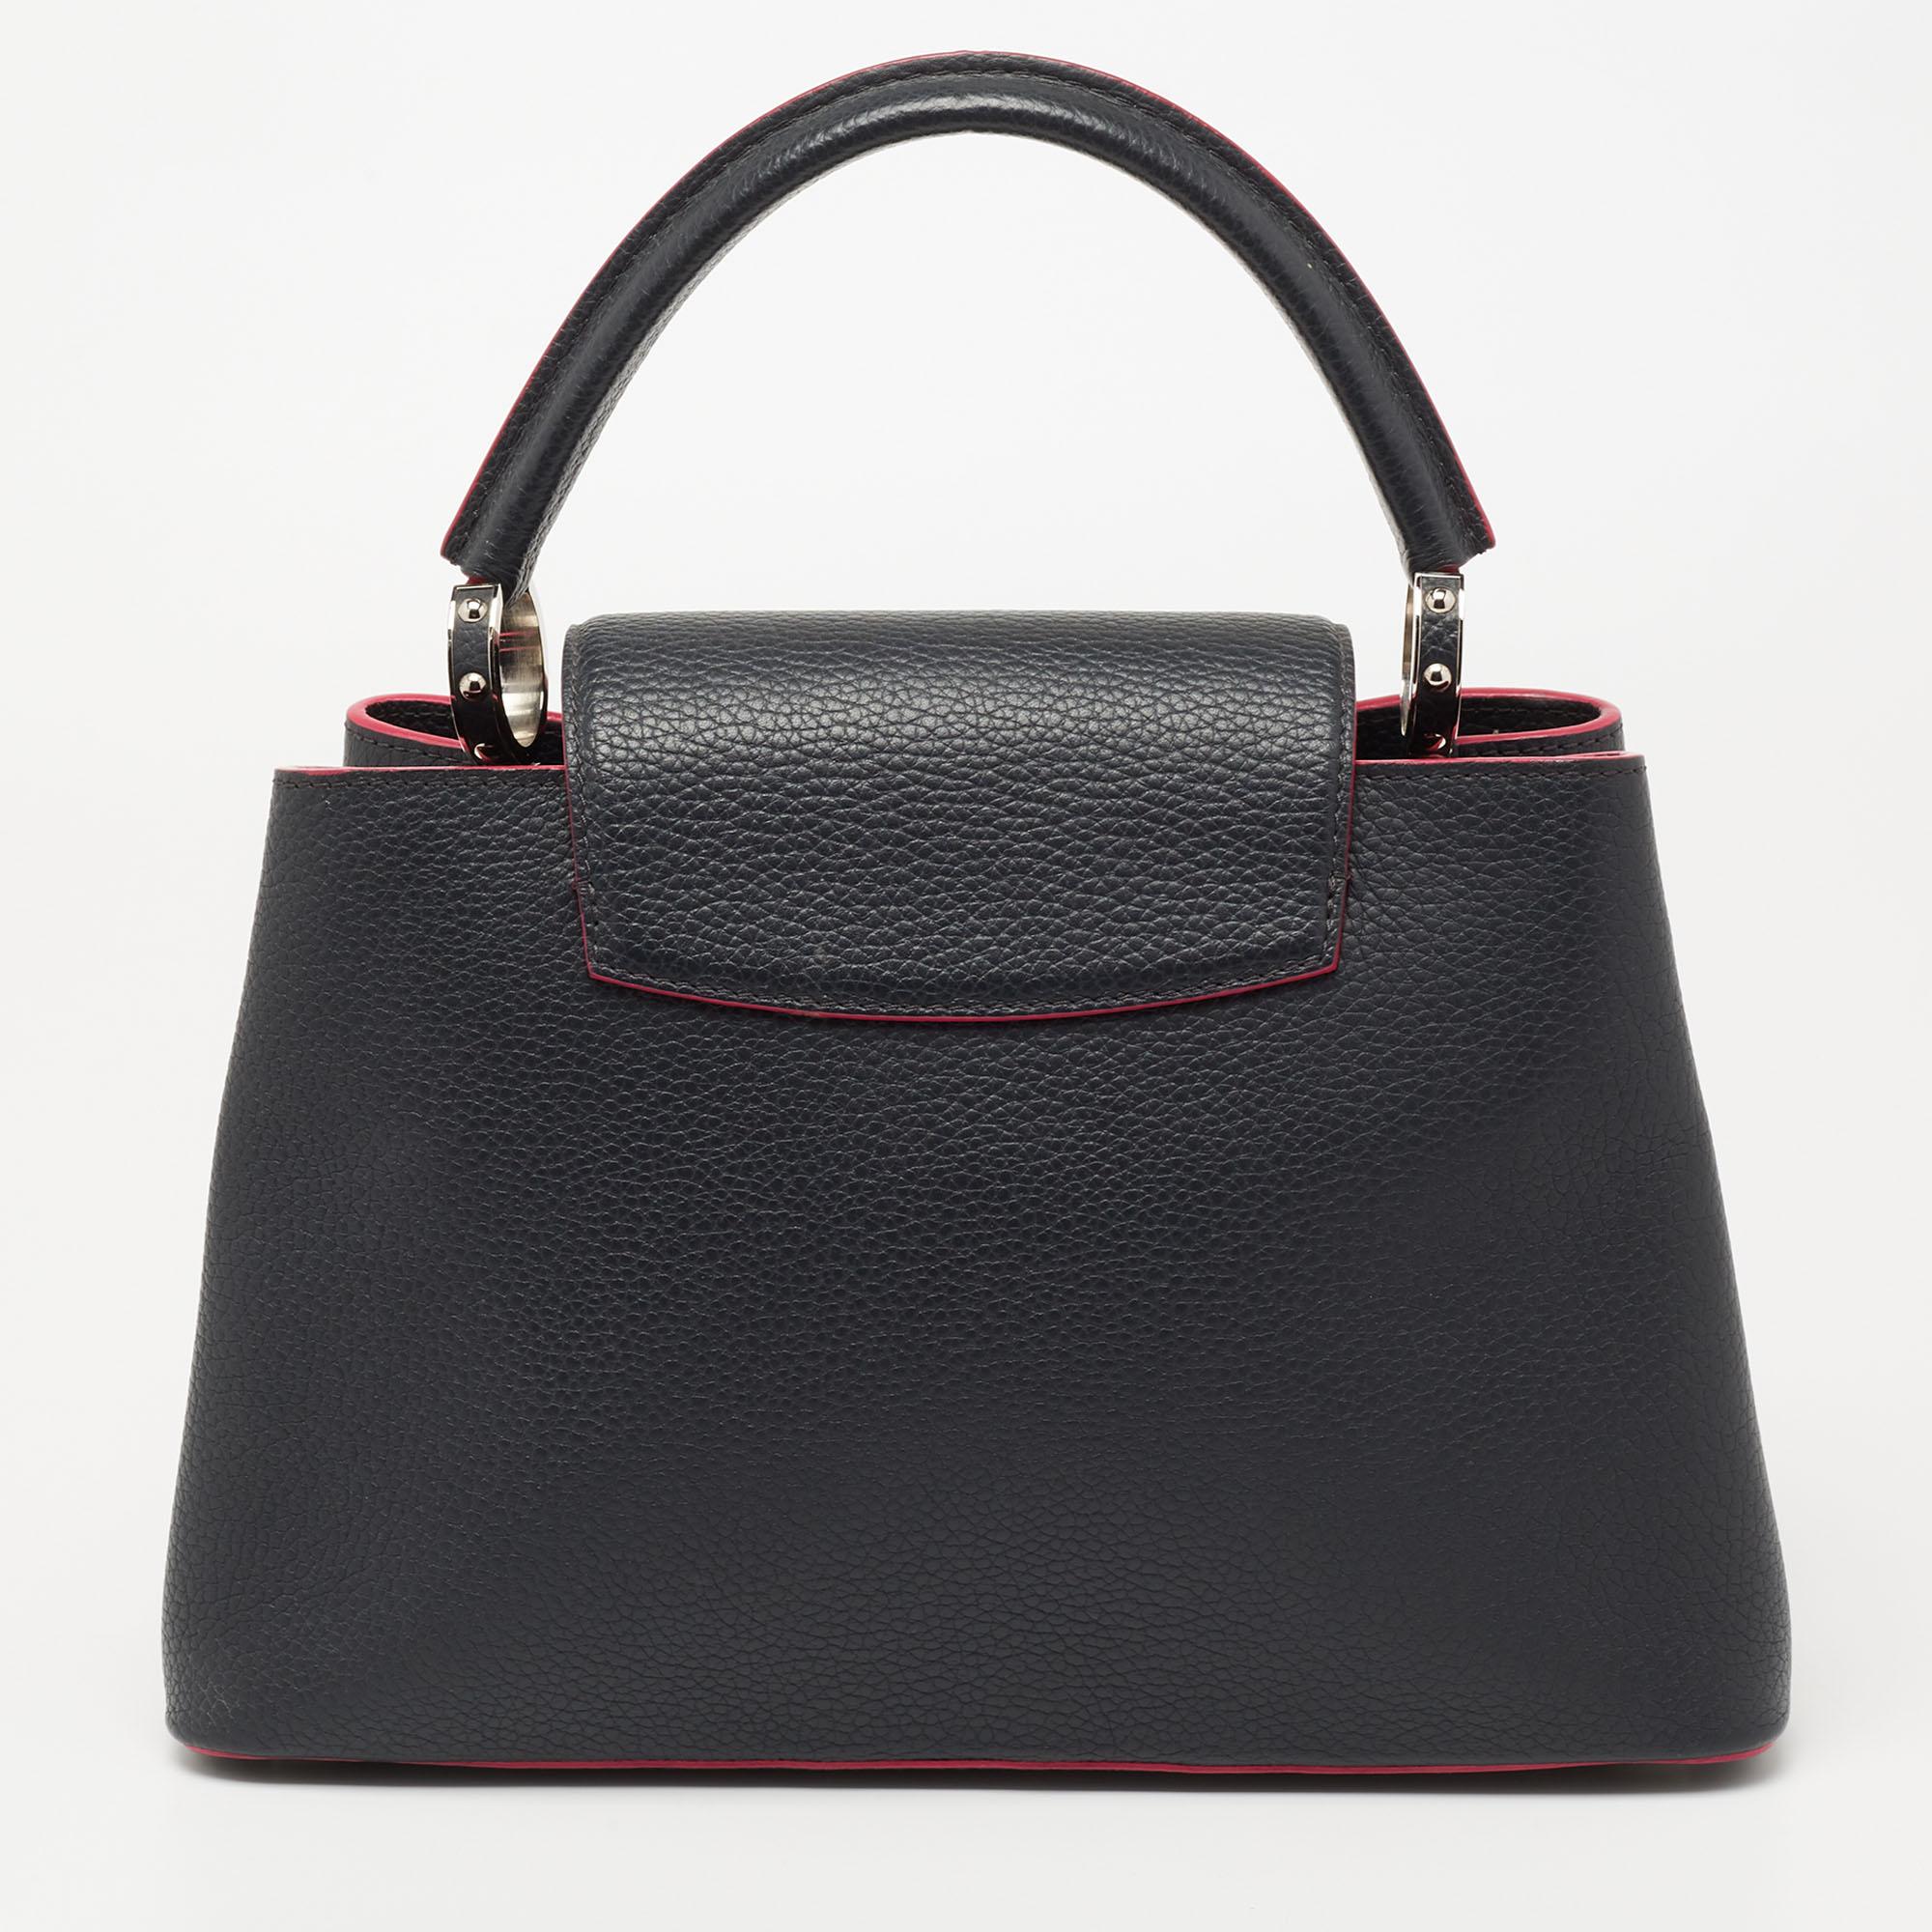 Merged beautifully with signature design, this Capucines MM bag from Louis Vuitton remains globally popular. This irresistible and elegant bag not just highlights your impeccable styling choices but also meets your practical demands. It is crafted